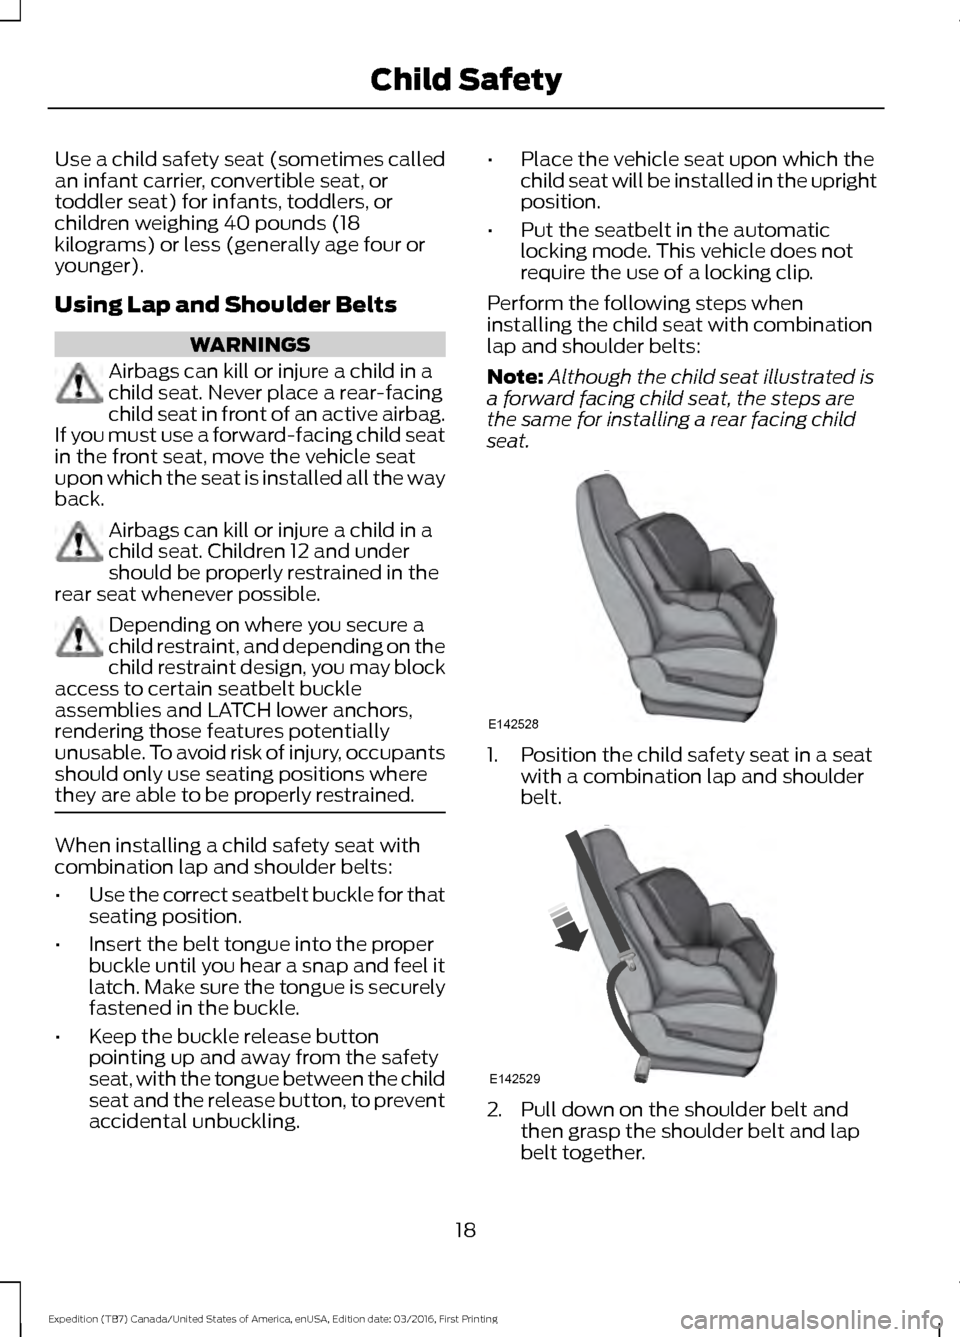 FORD EXPEDITION 2017 3.G Owners Manual Use a child safety seat (sometimes called
an infant carrier, convertible seat, or
toddler seat) for infants, toddlers, or
children weighing 40 pounds (18
kilograms) or less (generally age four or
youn